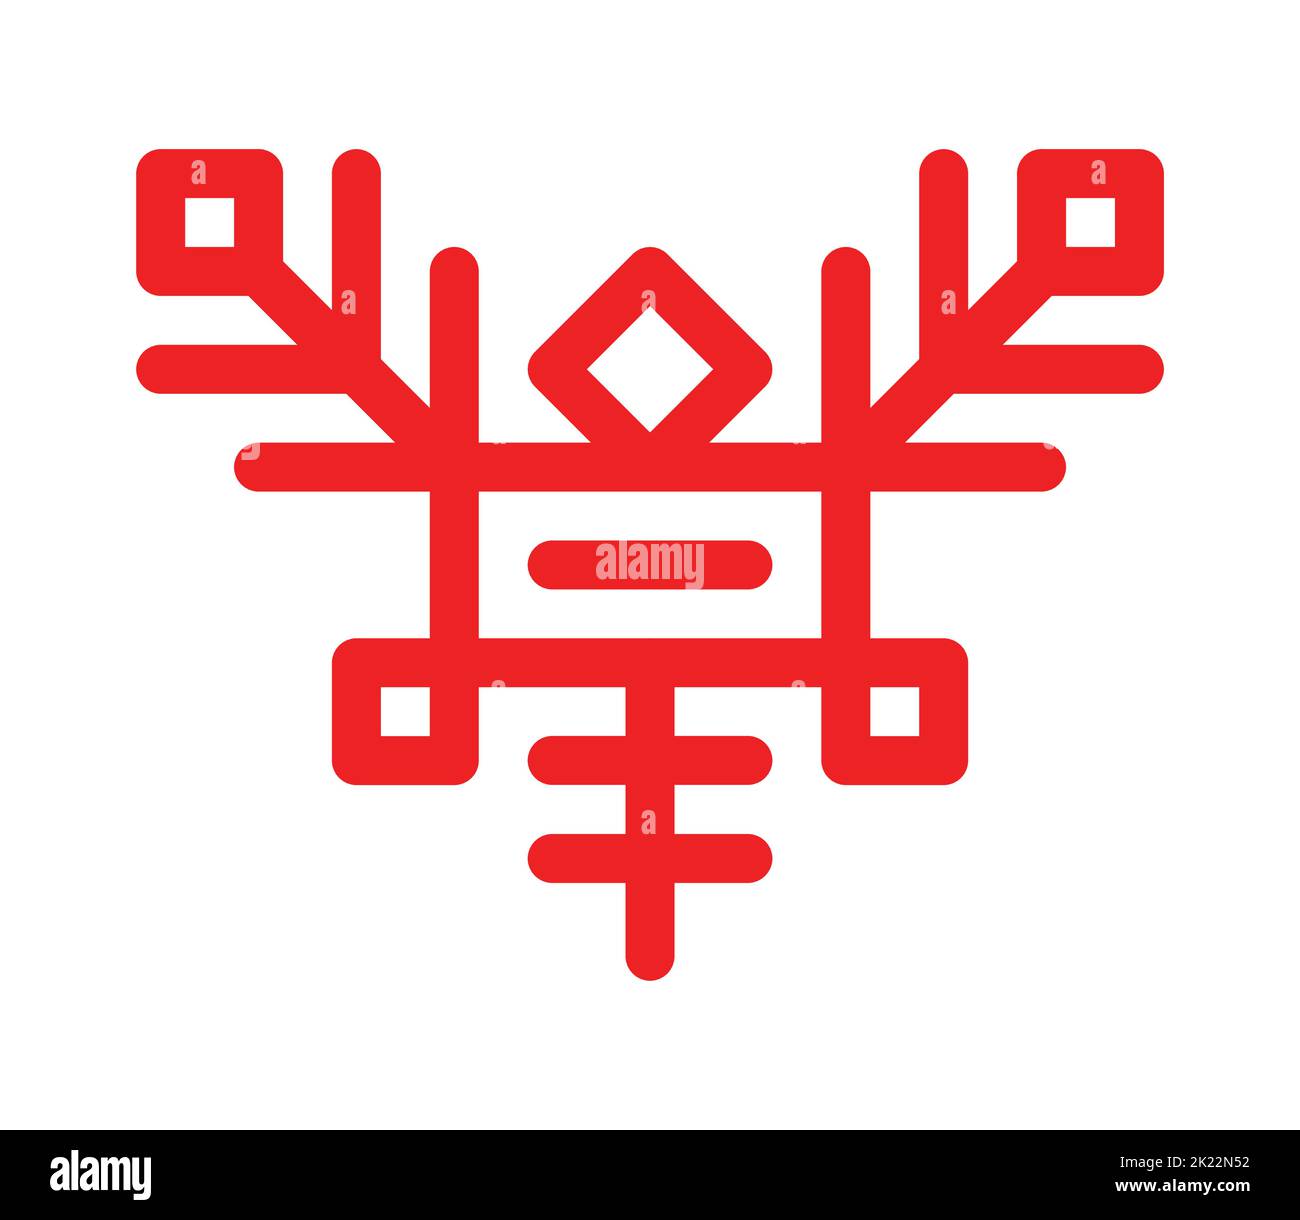 Vector ornamental concept has red simple symbol of flying insect. Outline icon of mosquito is traditional decorative element of Karelia and Finland pe Stock Vector